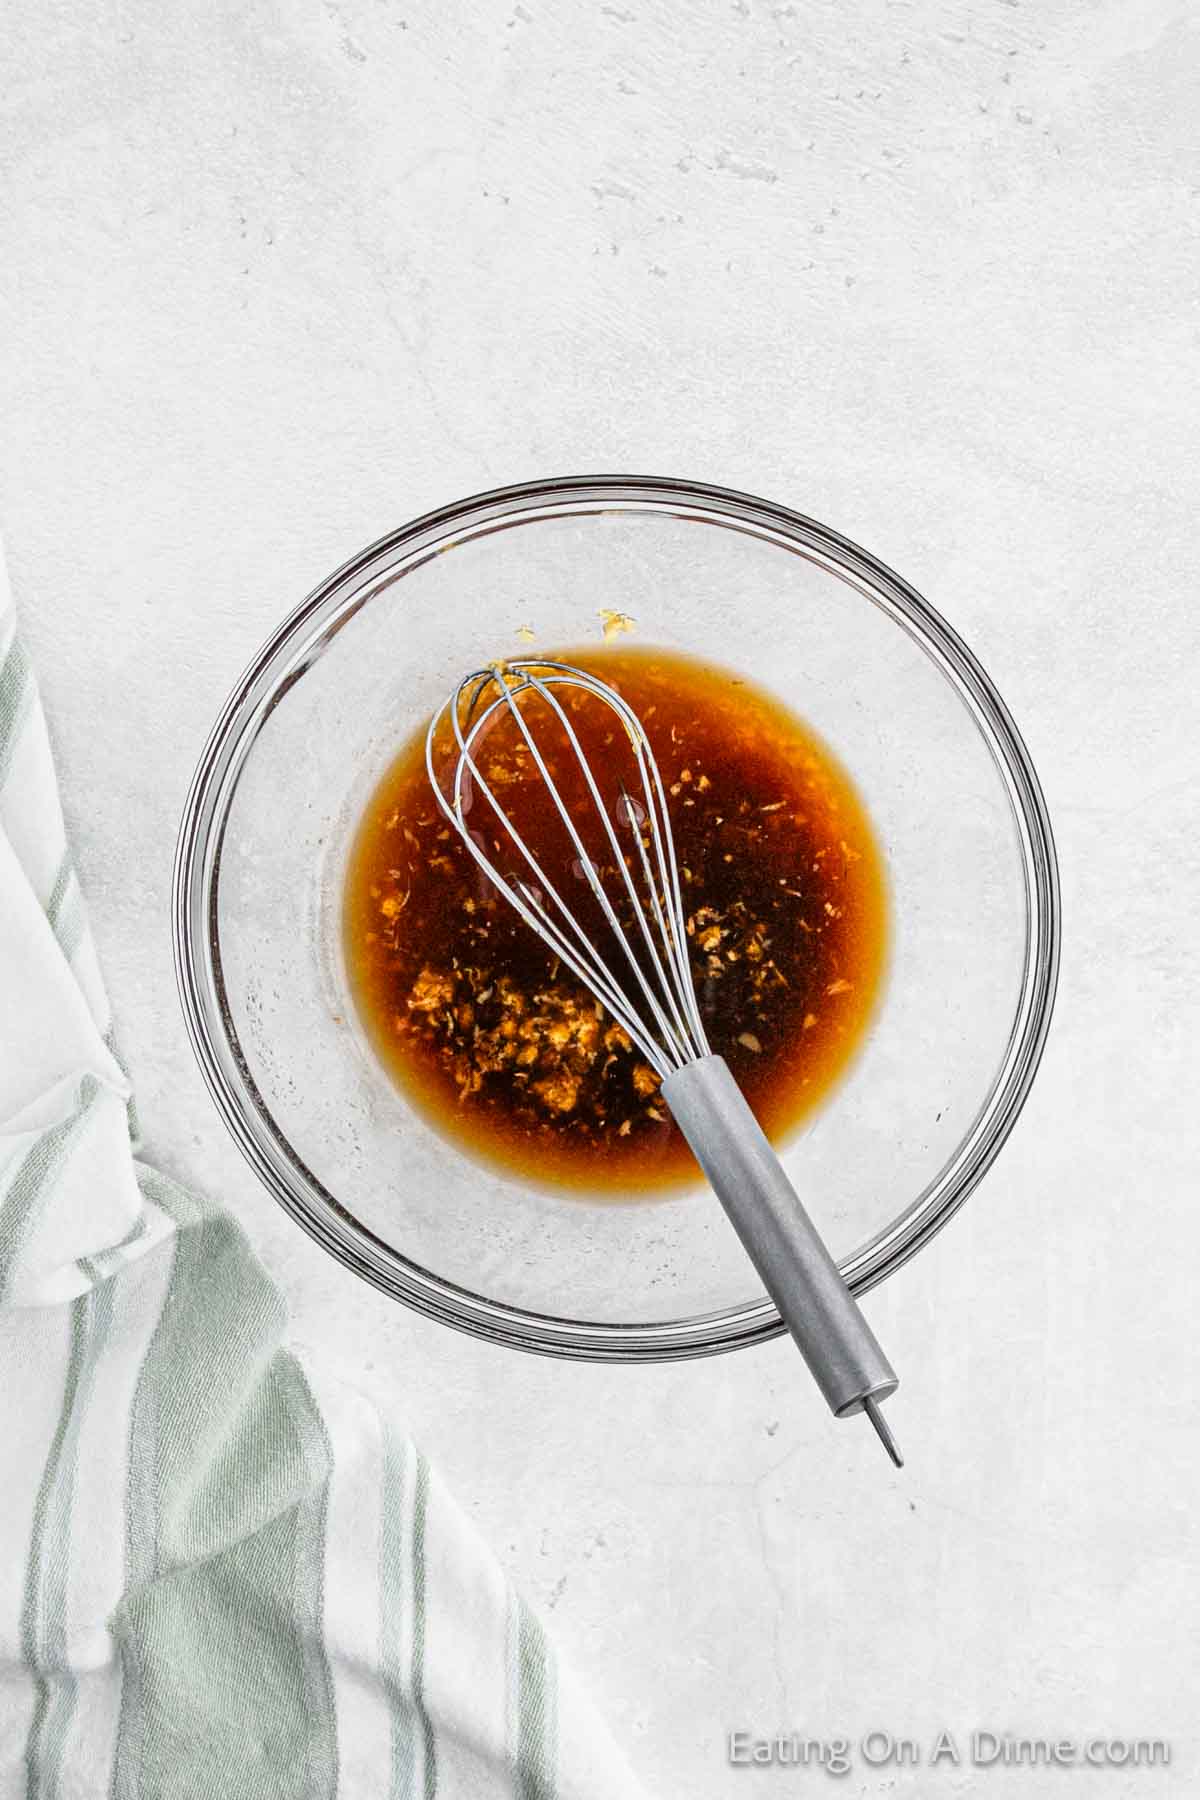 Combining pineapple juice, soy sauce, honey, garlic, ginger in a bowl with a whisk